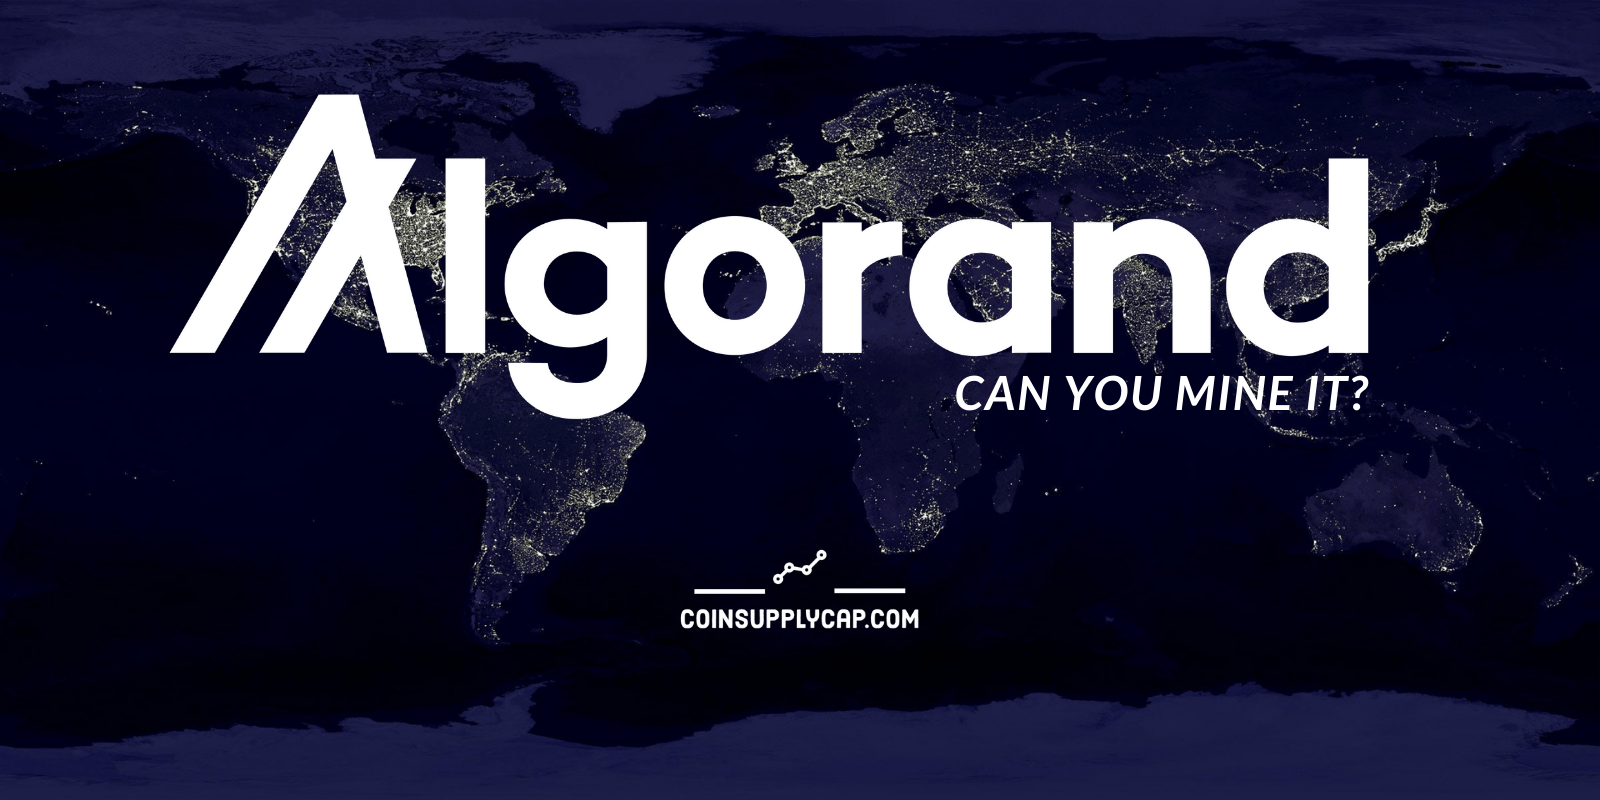 Featured image for “Can Algorand be mined?”